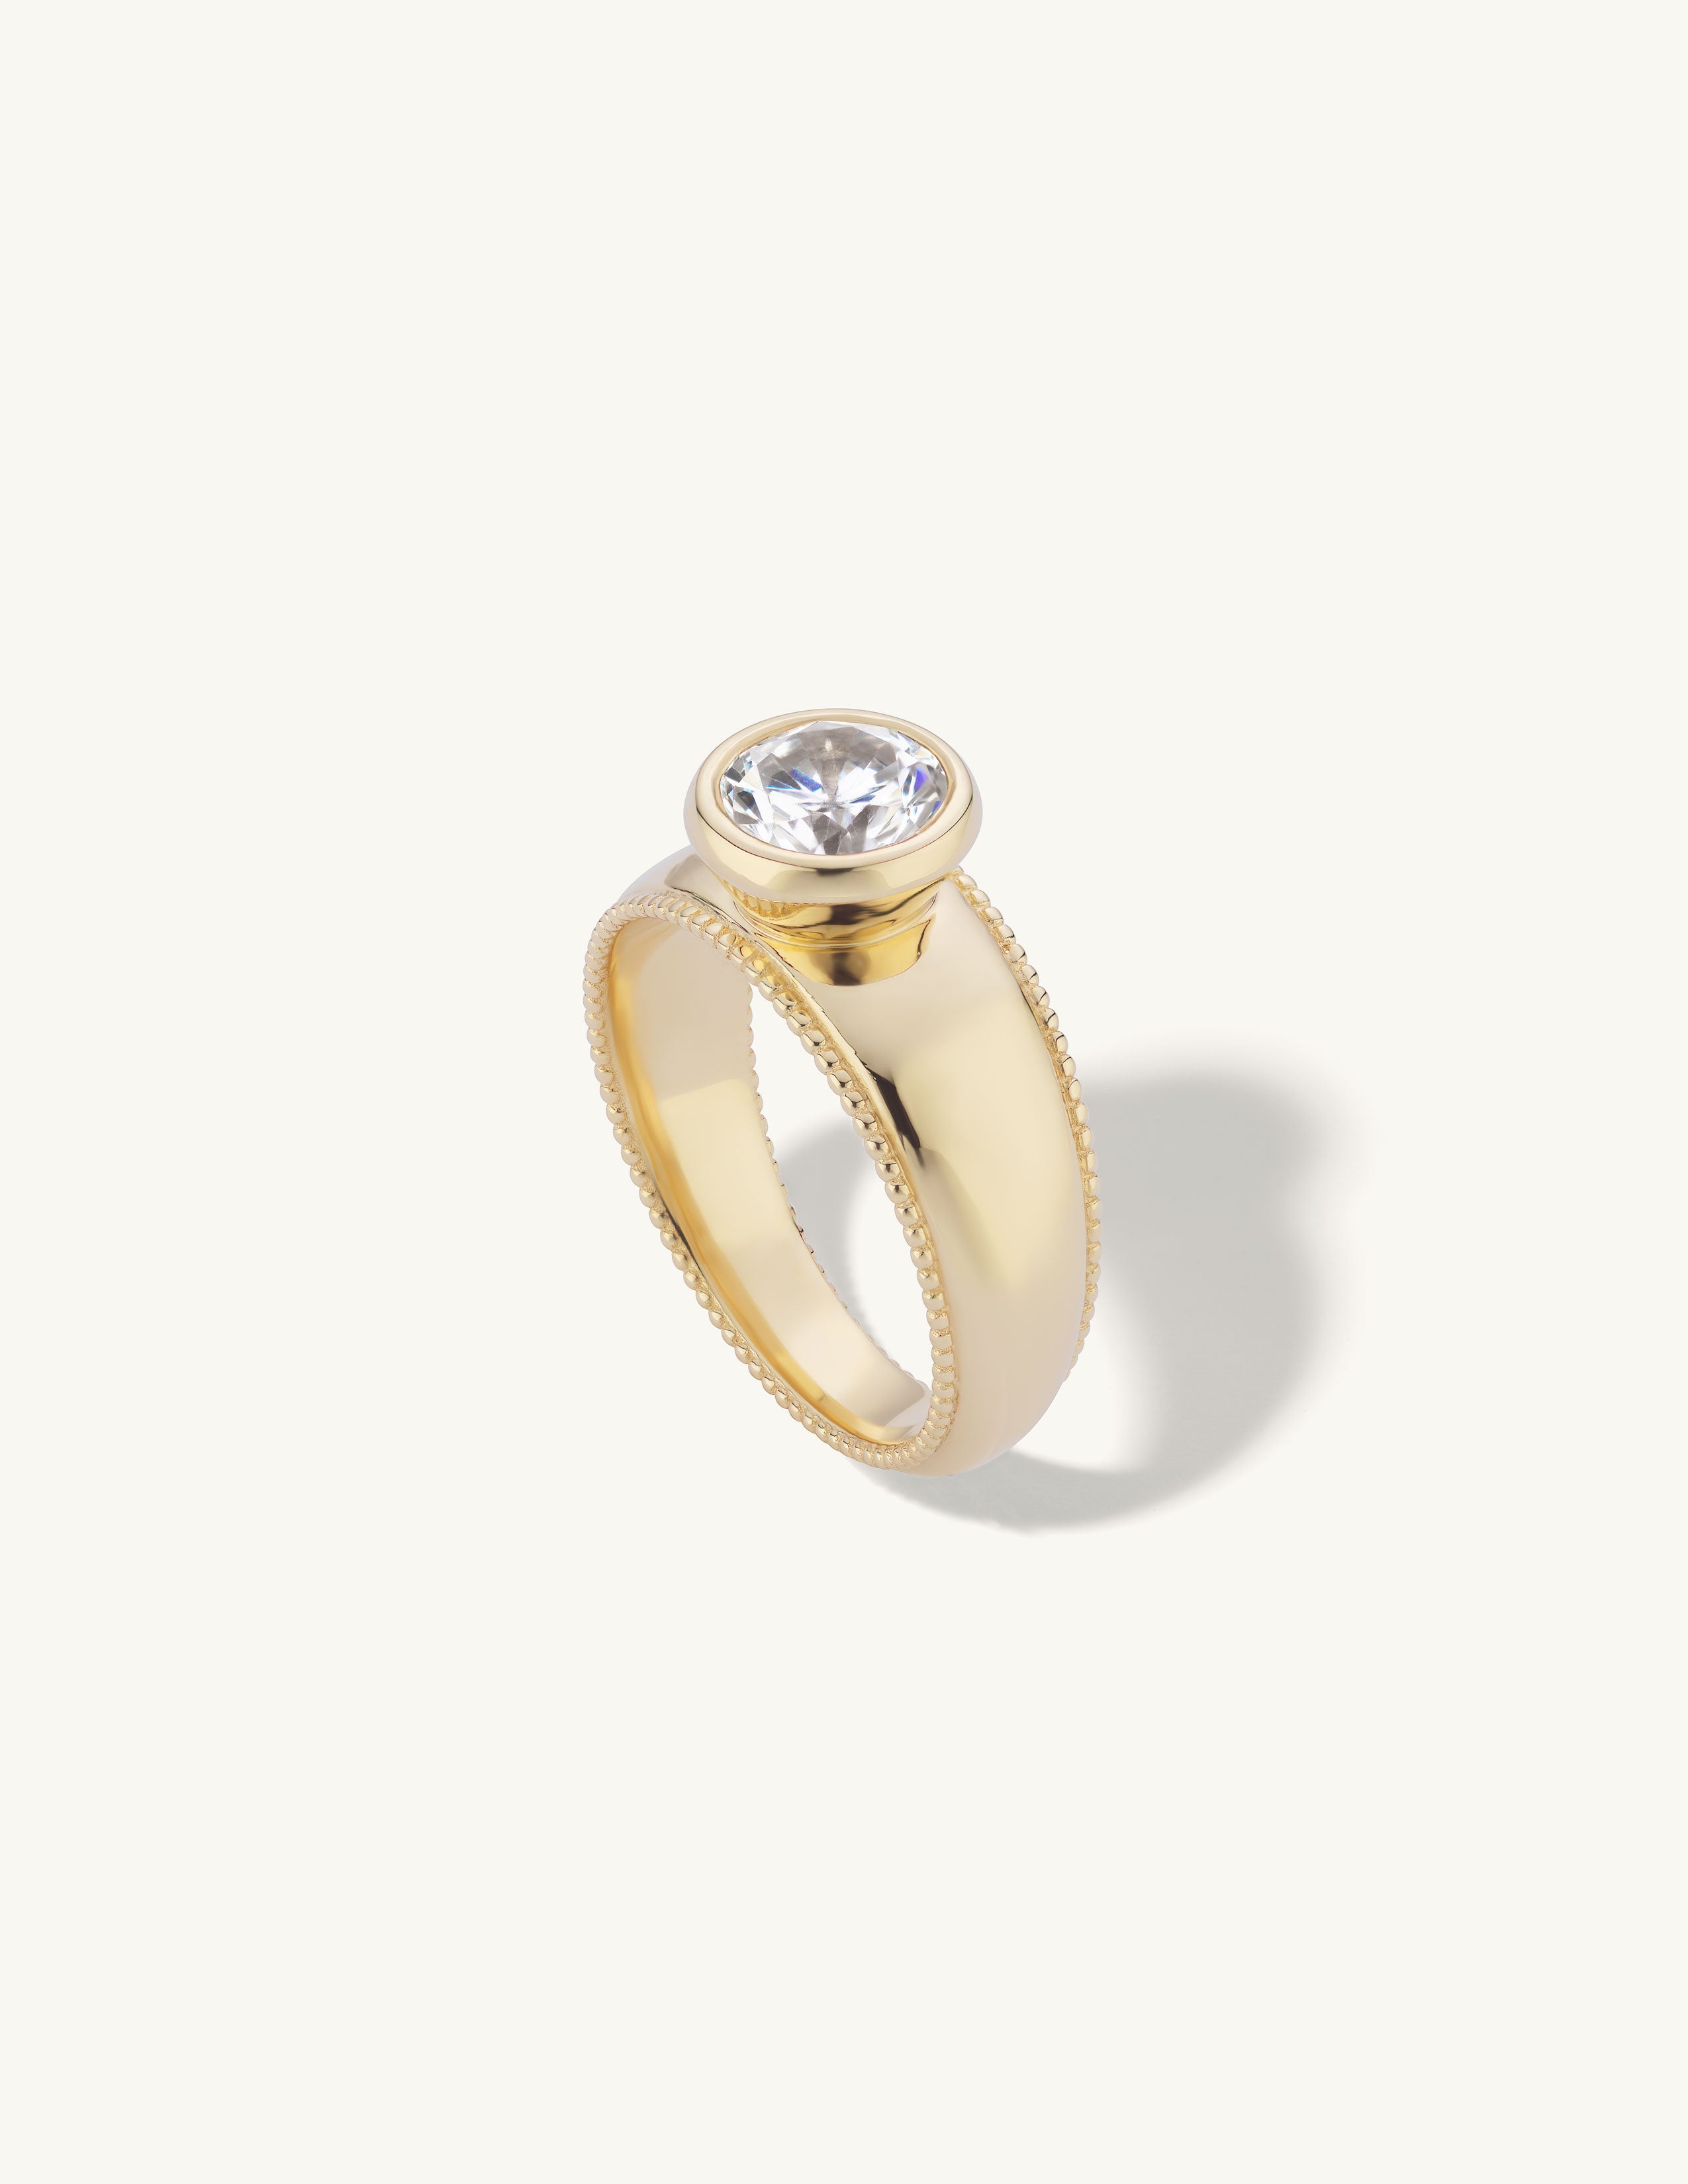 Wide Engagement Try-On Ring with Milgrain